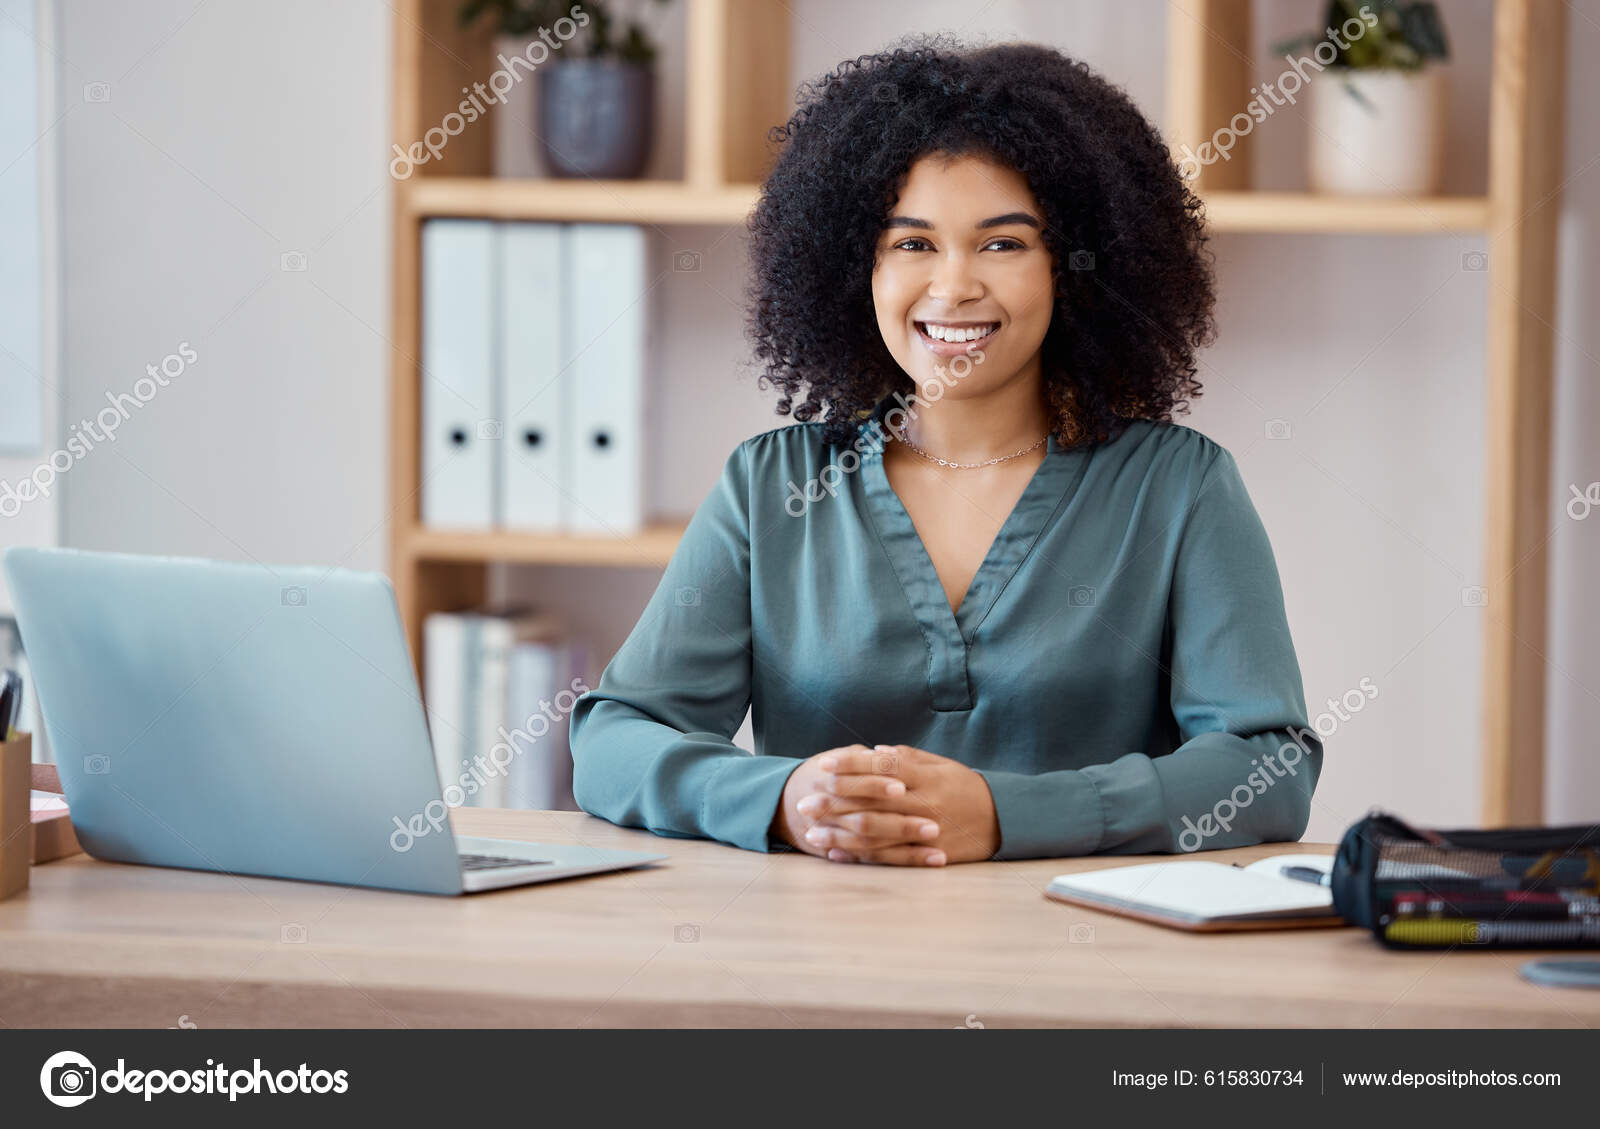 Stylish woman working at her desk